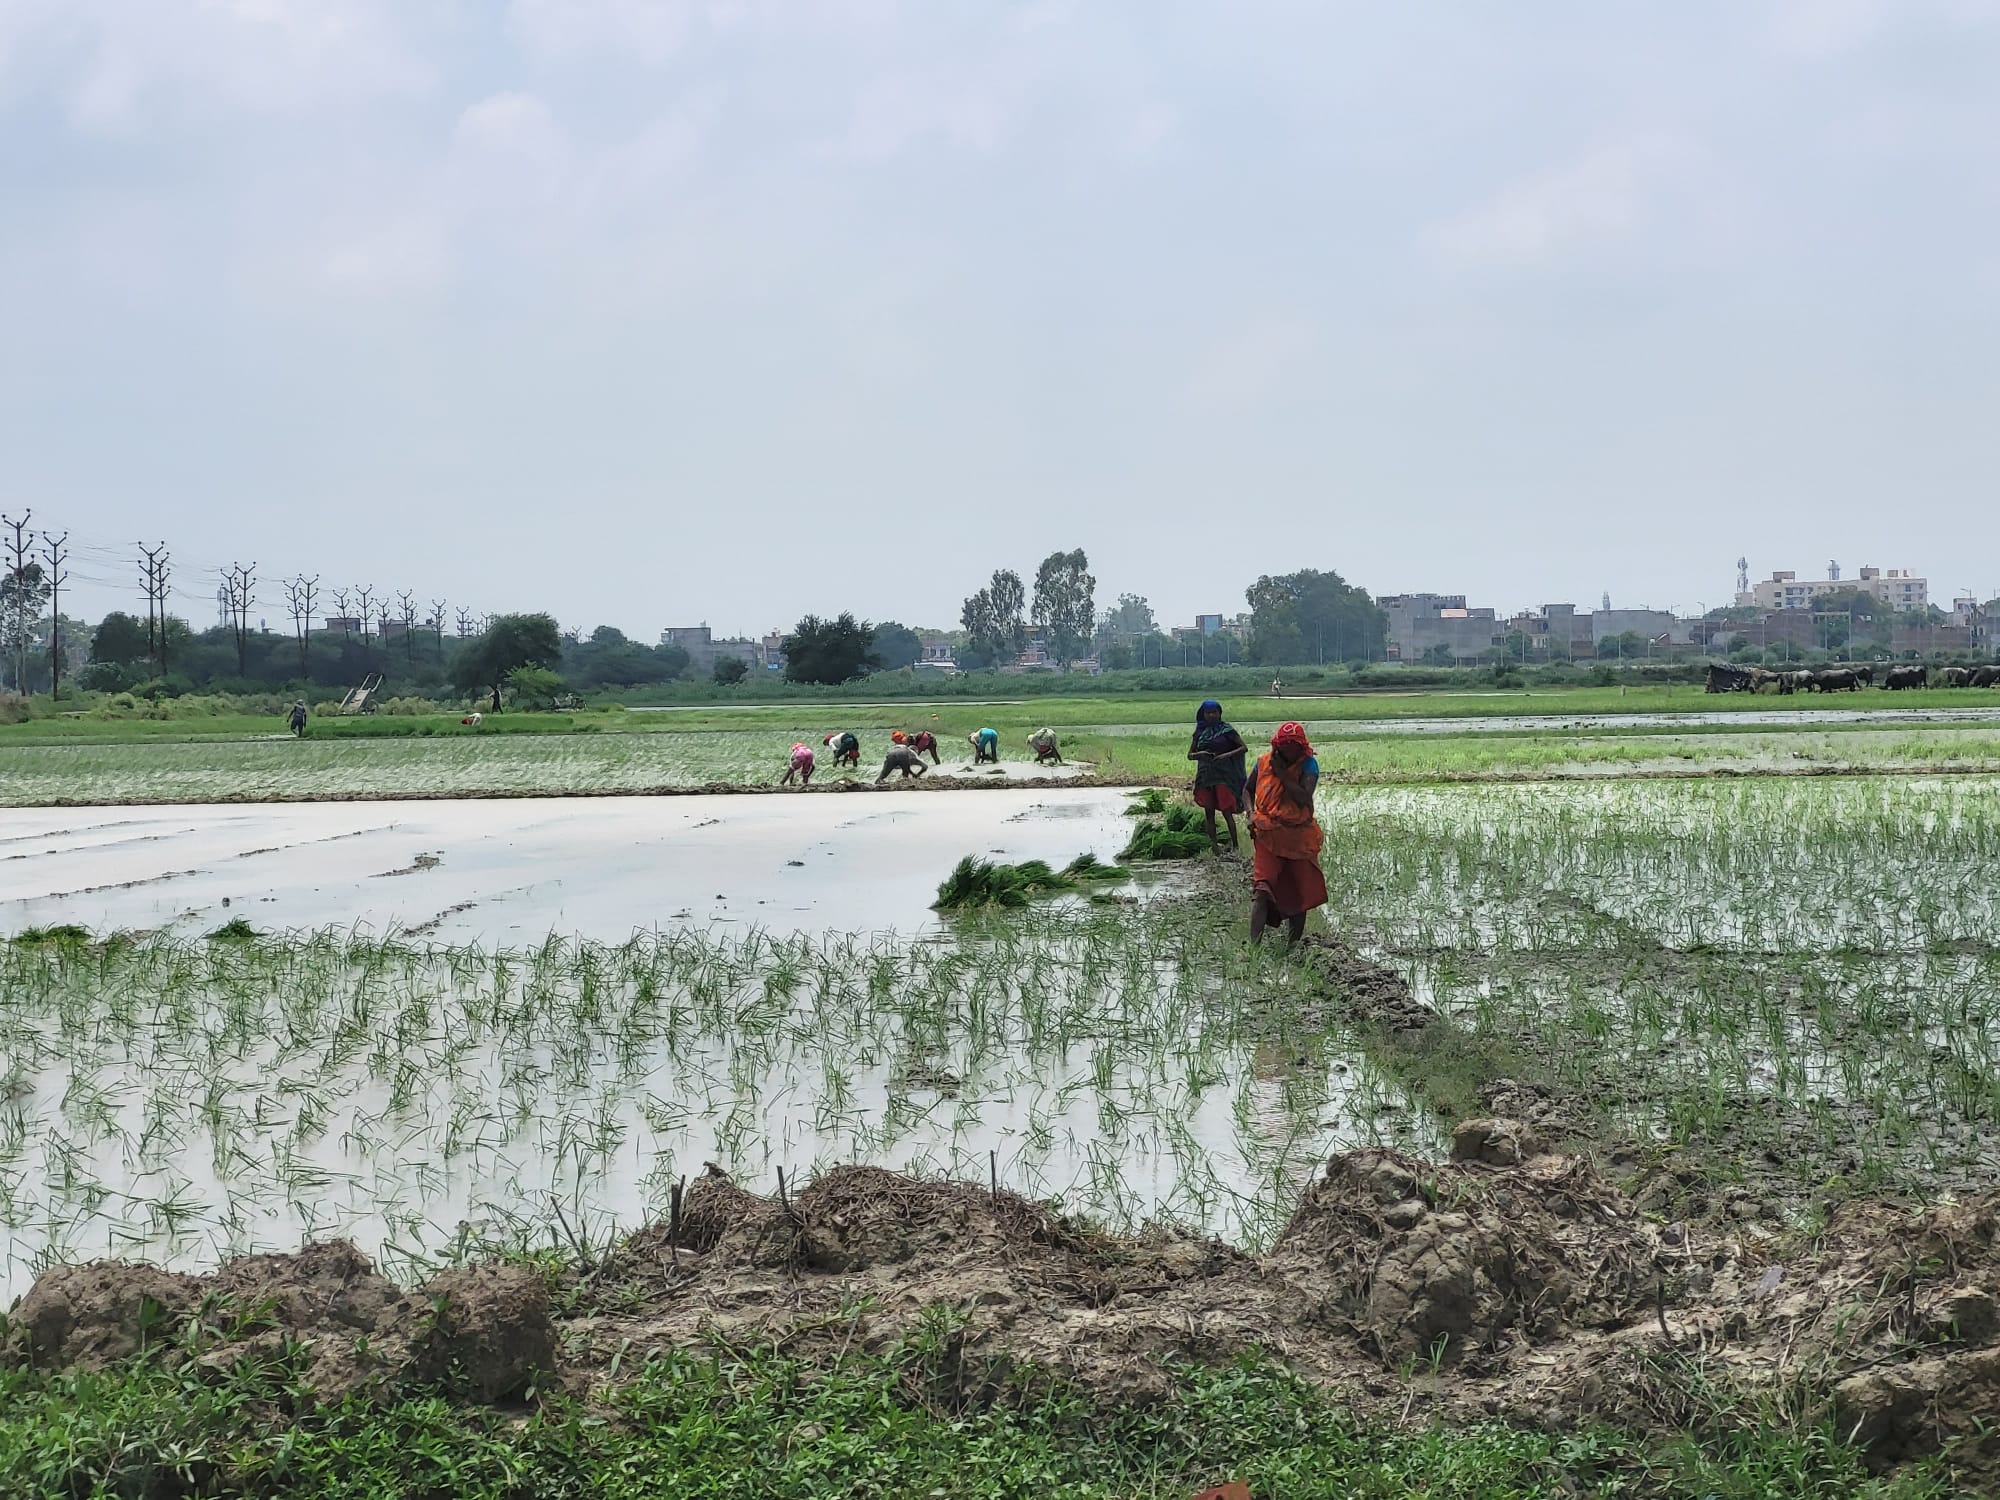 Planting rice in the villages near Kanpur